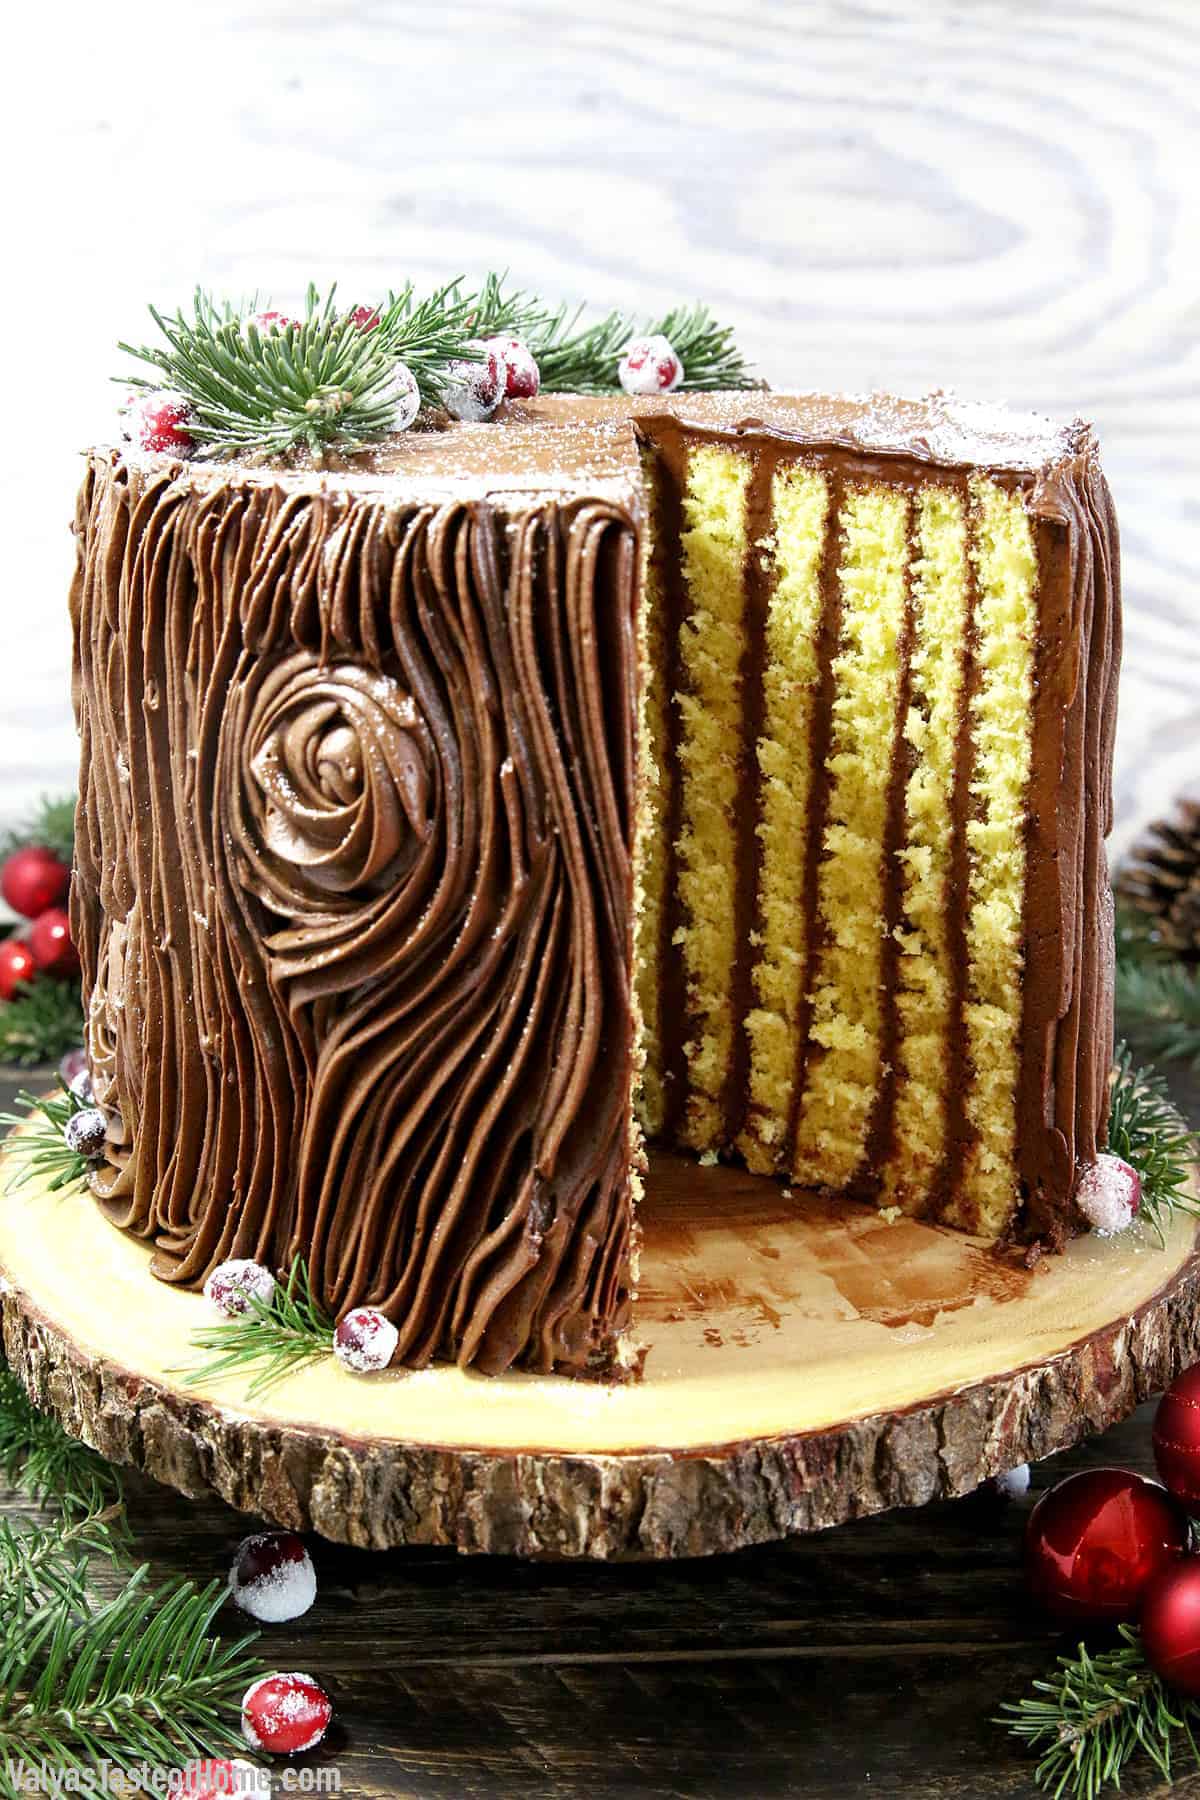 he Best Tree Stump Cake dessert, with its irresistible chocolate buttercream frosting and the beauty of a true show stopper. It's perfect for Christmas, any holiday, or a woodland theme party.